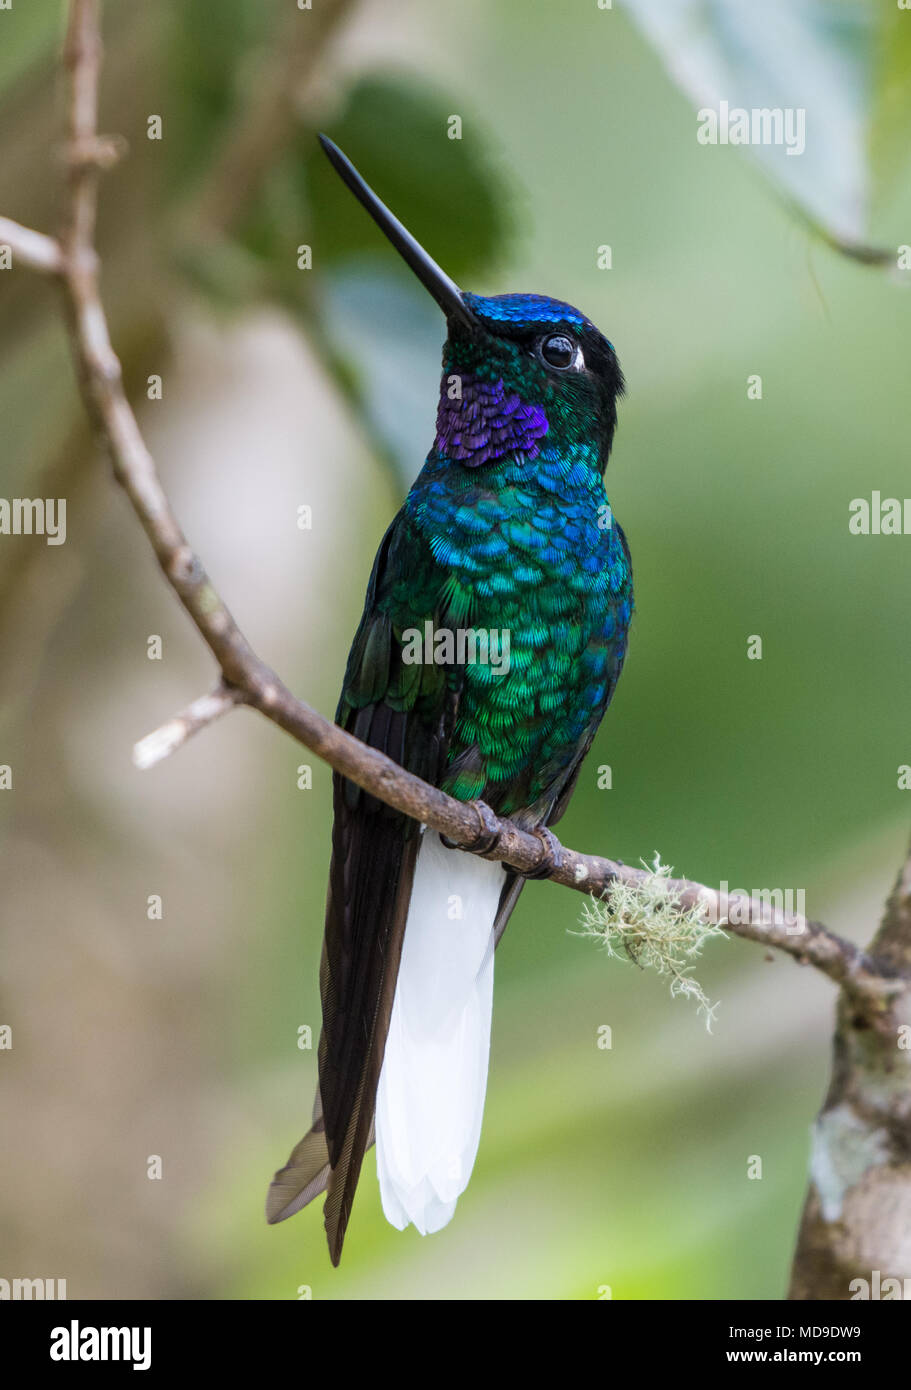 A colorful White-tailed Starfrontlet (Coeligena phalerata) showing his beautiful plumage. Colombia, South America. Stock Photo